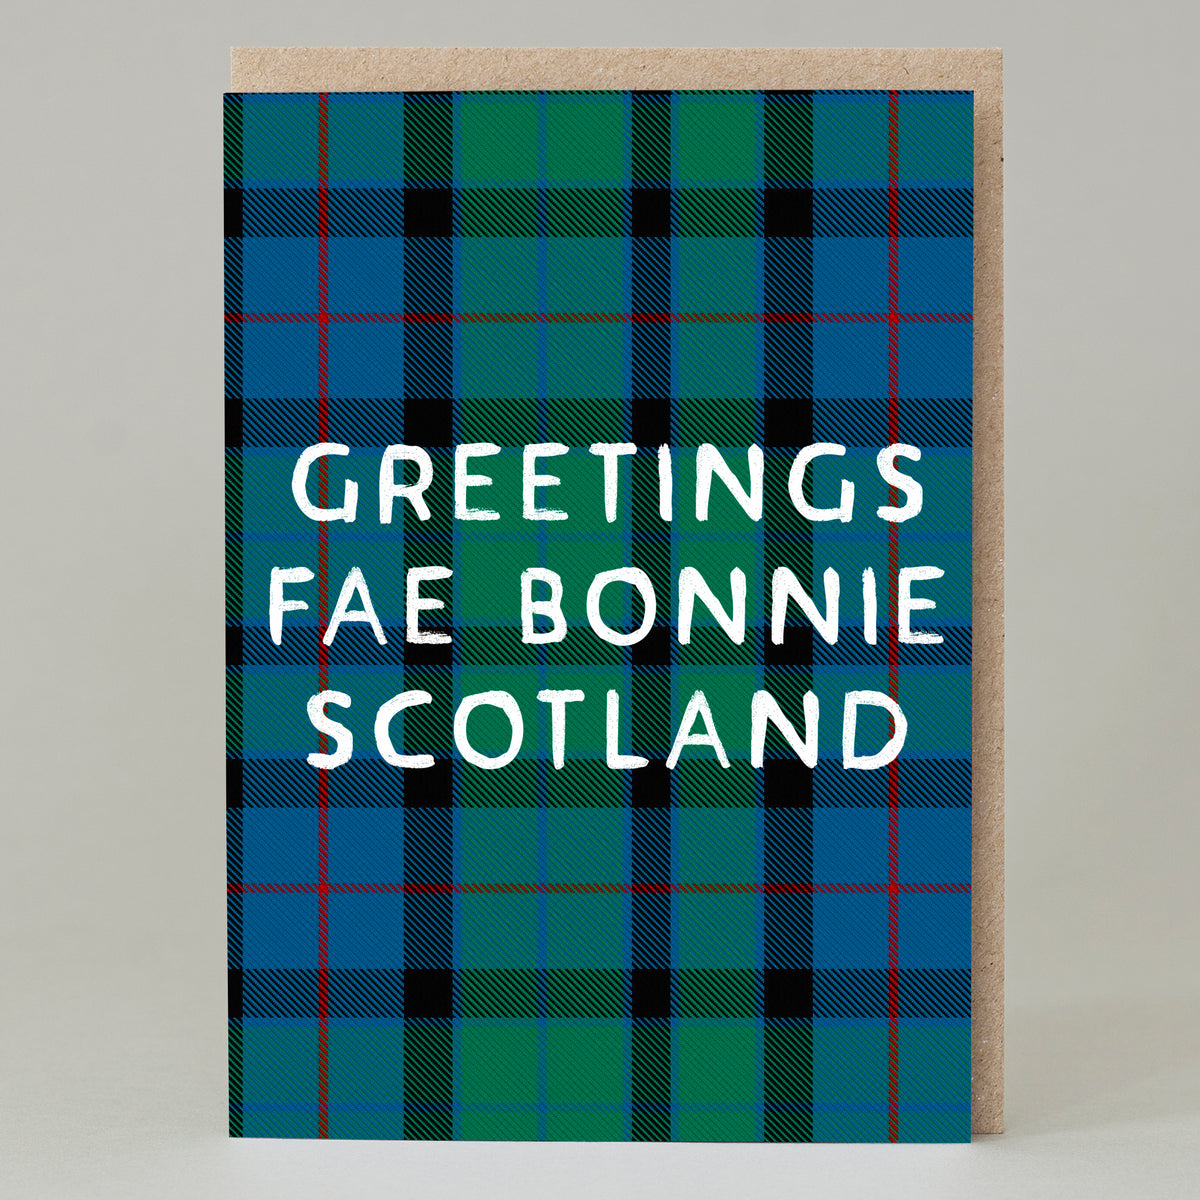 A royal blue and racing green cross hatch tartan patten with thin red accents saying the words greetings fae bonnie scotland in white capital letters